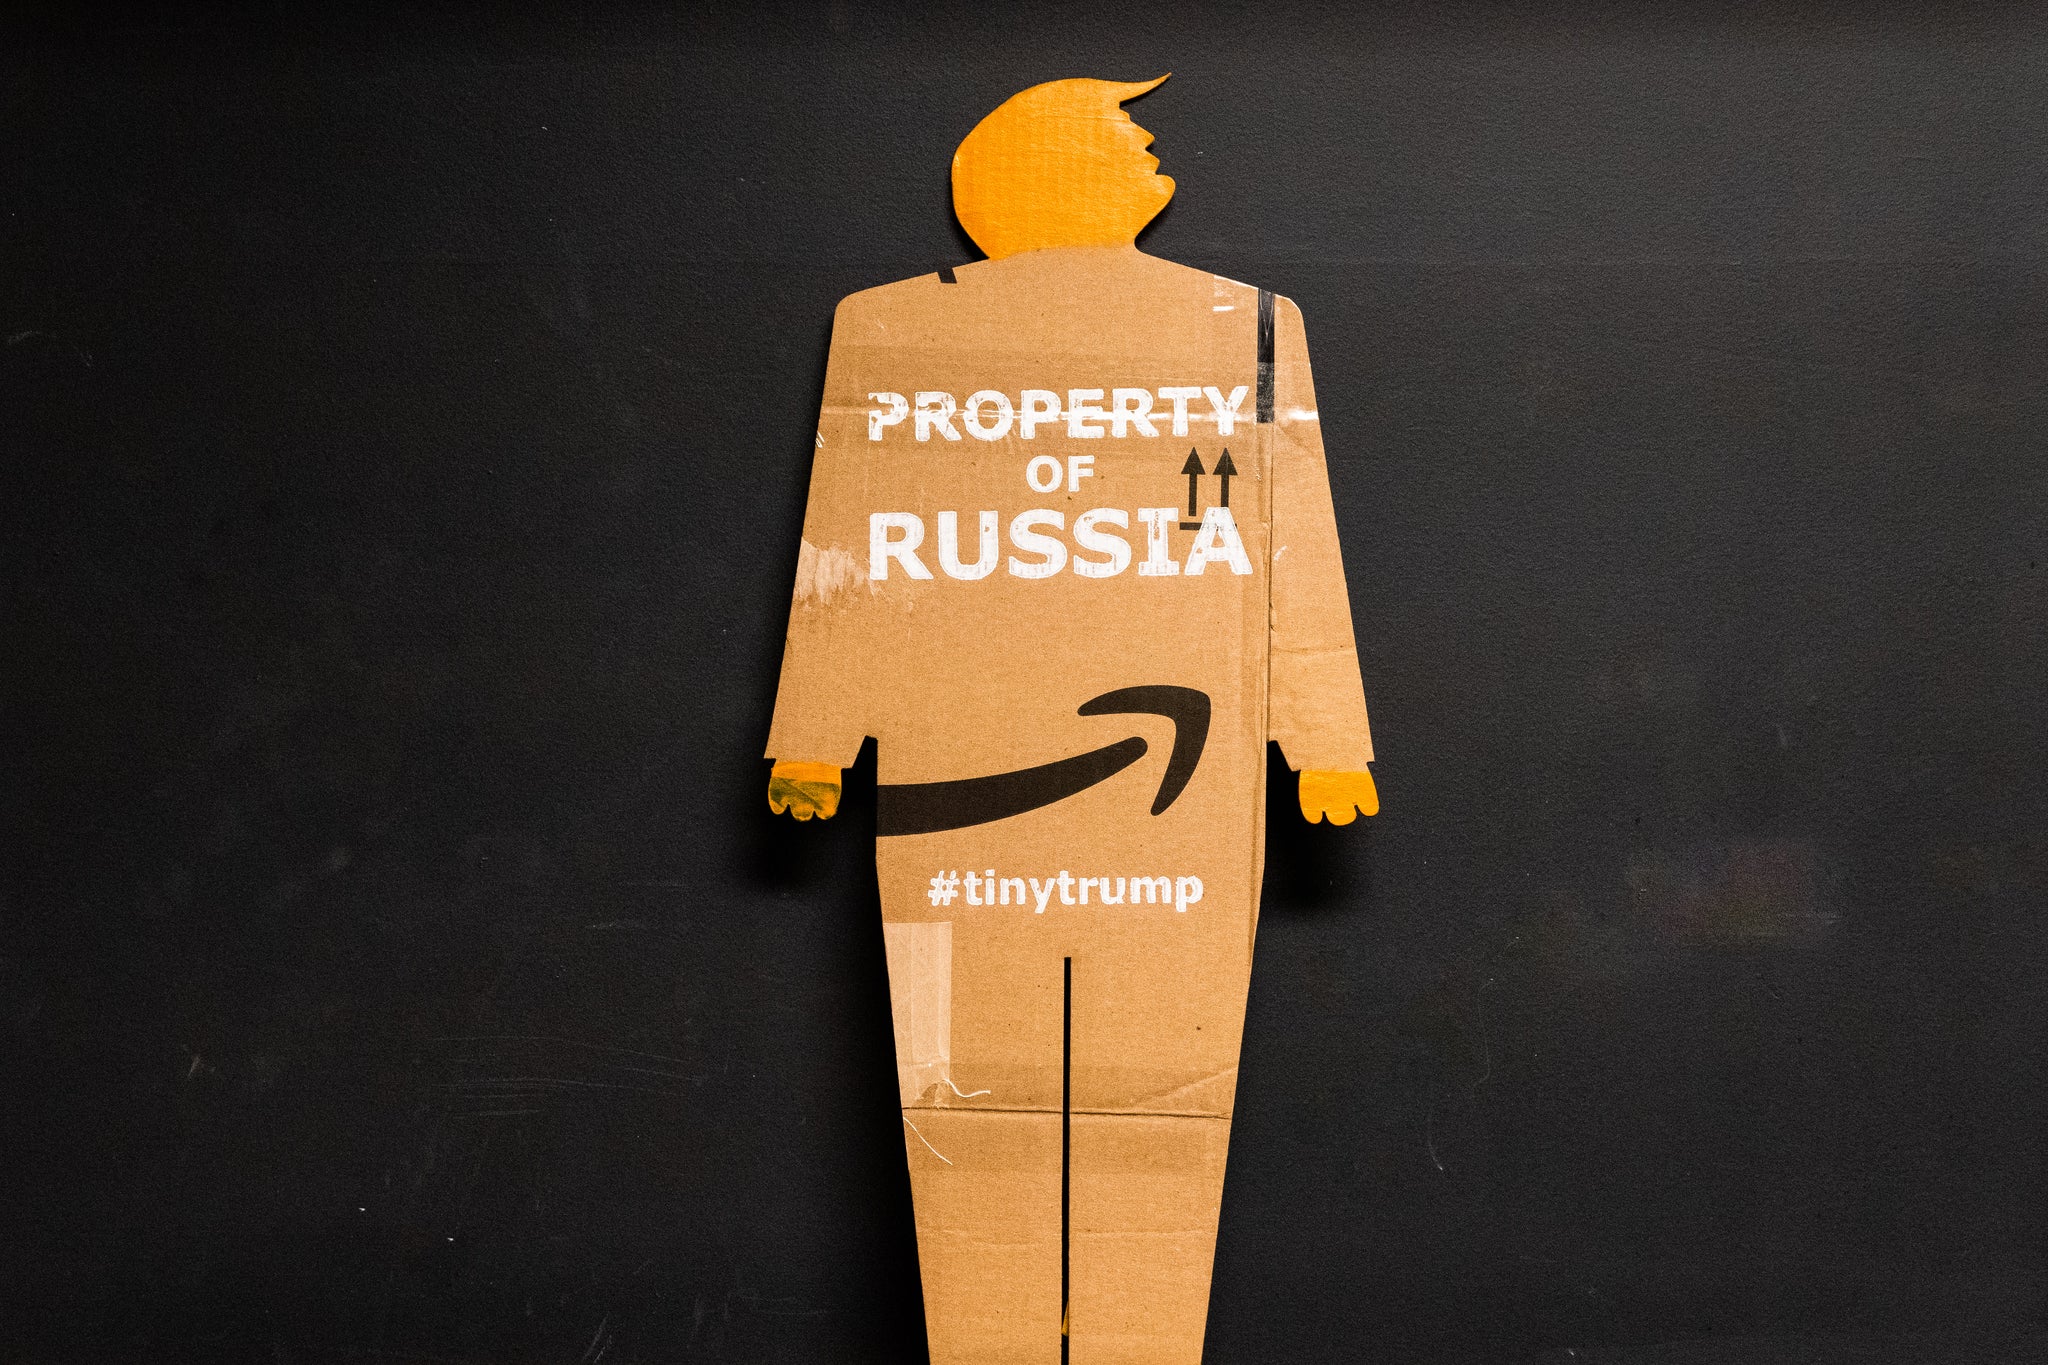 A two foot tall, cardboard tiny trump with the slogan "Property of Russia"